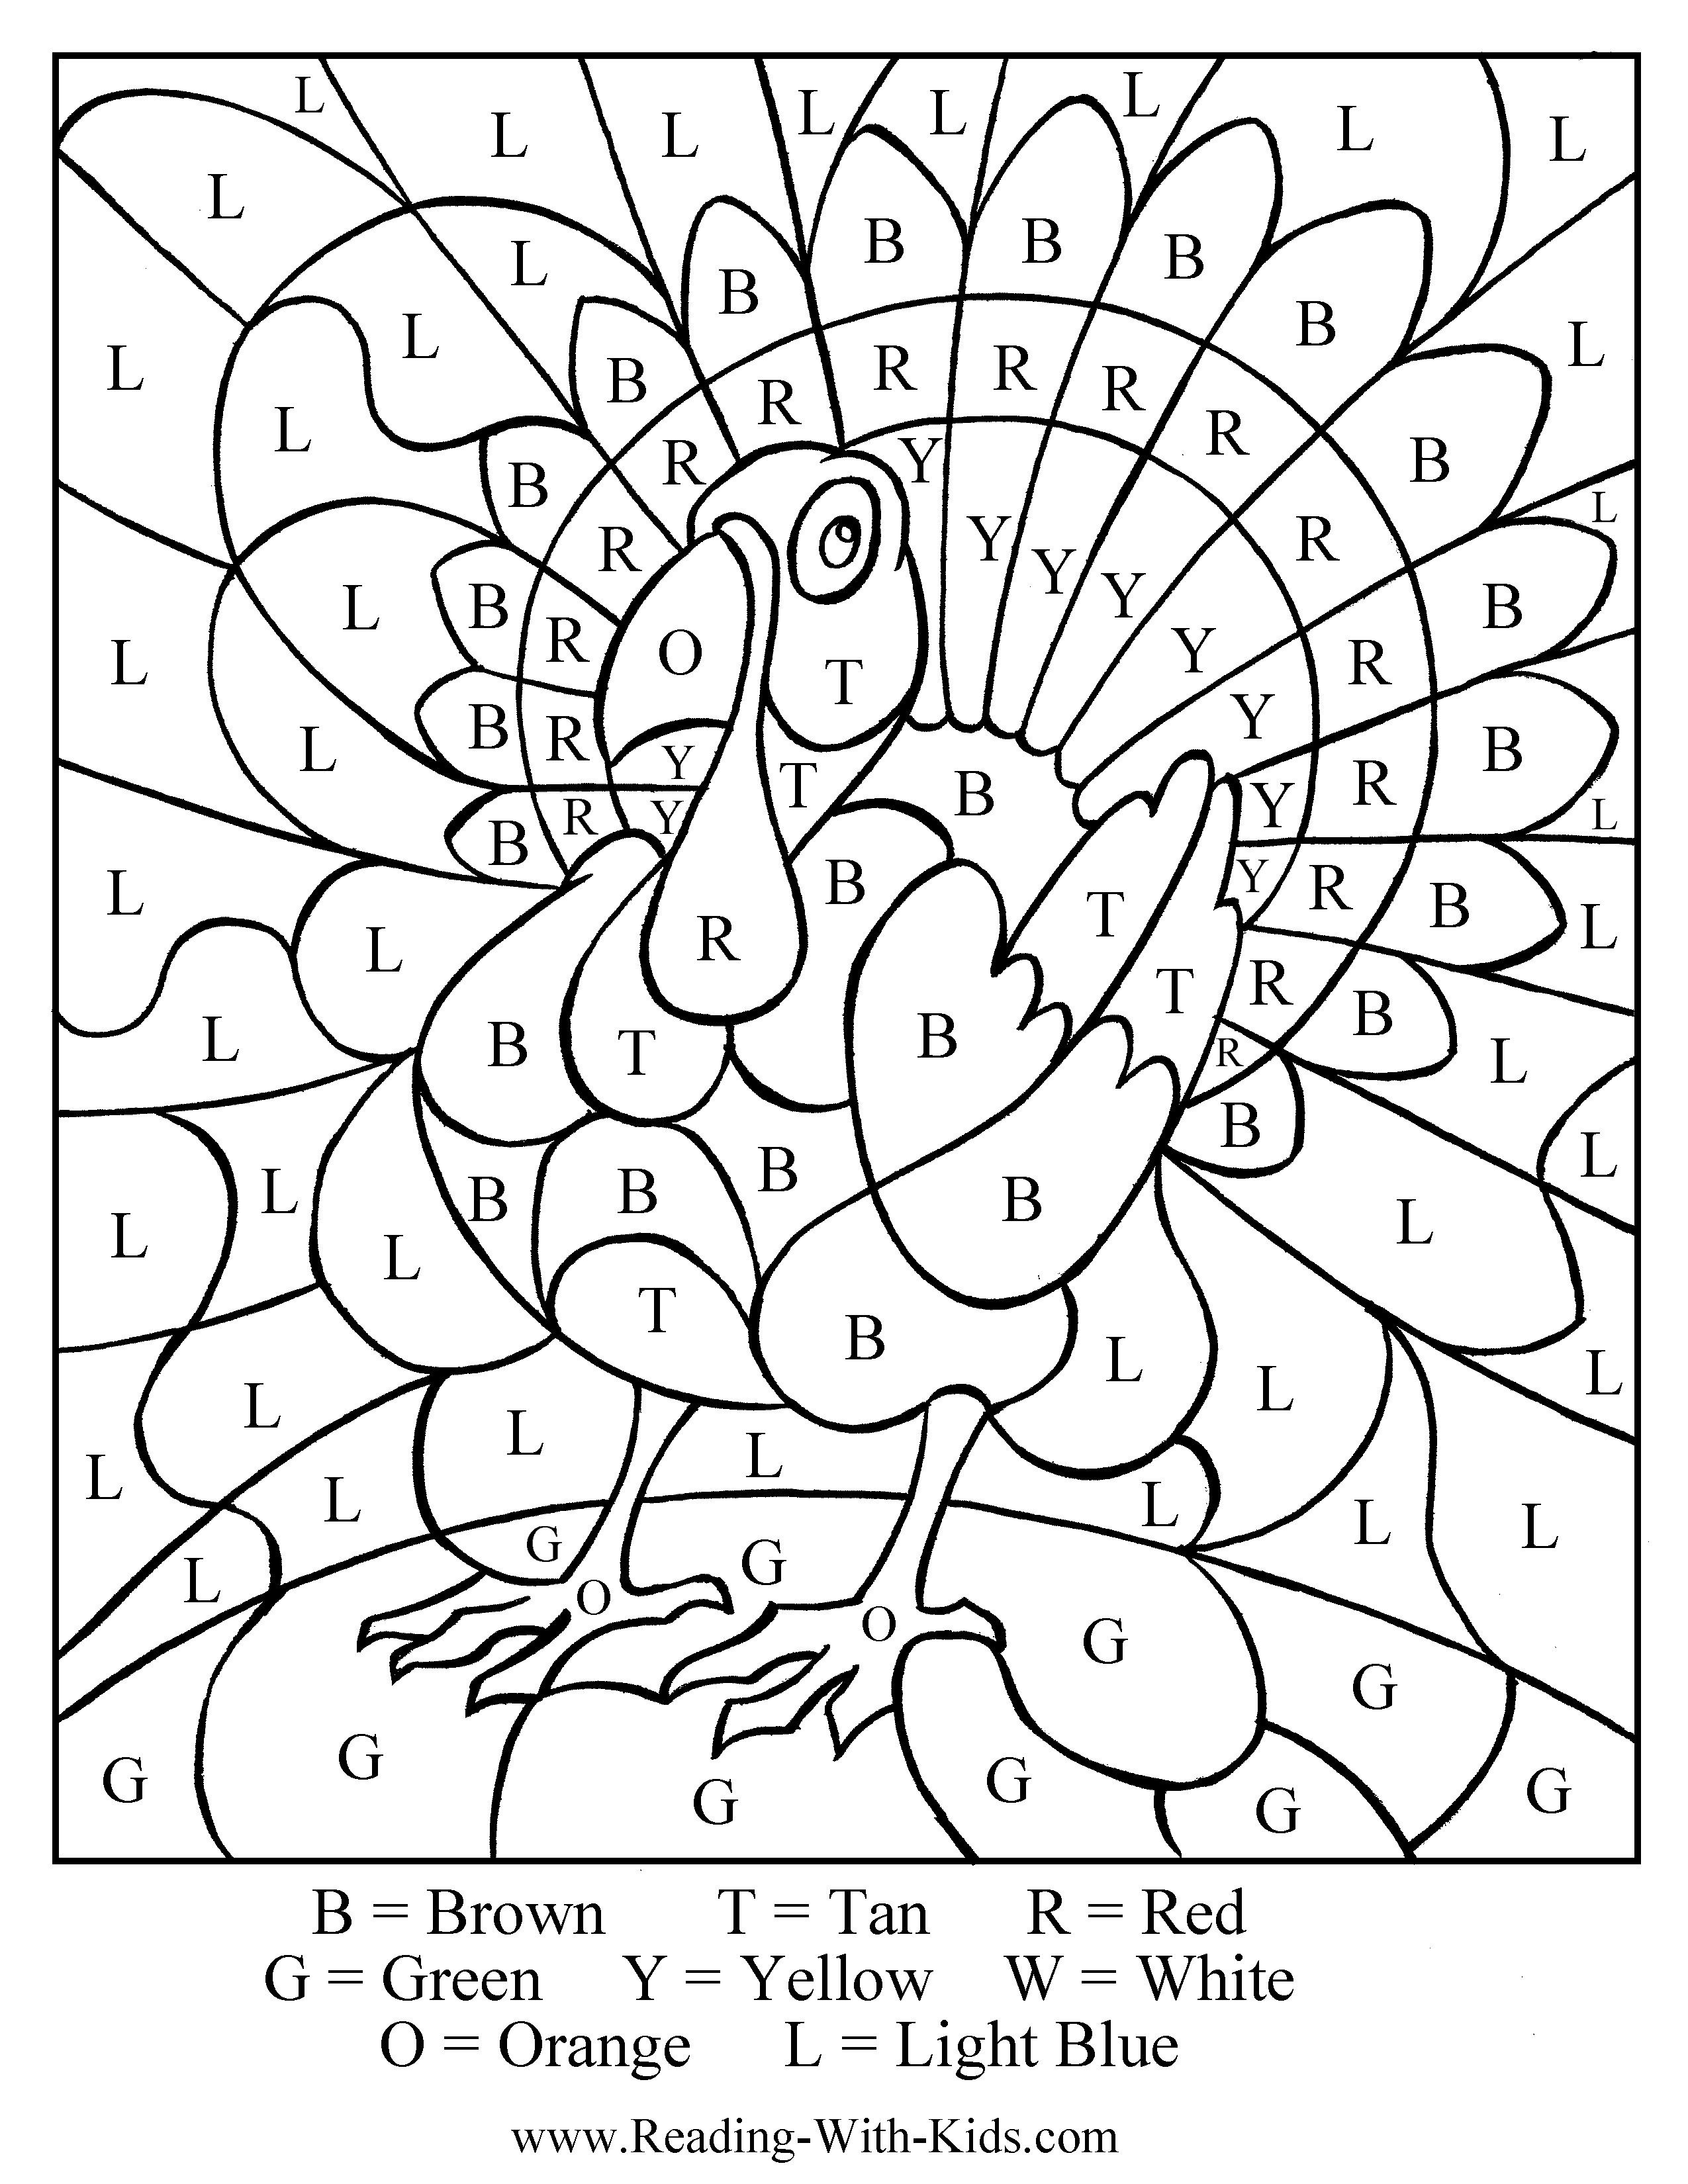 Colorletter Turkey - Several Great Thanksgiving Coloring Sheets - Free Printable Coloring Sheets Thanksgiving